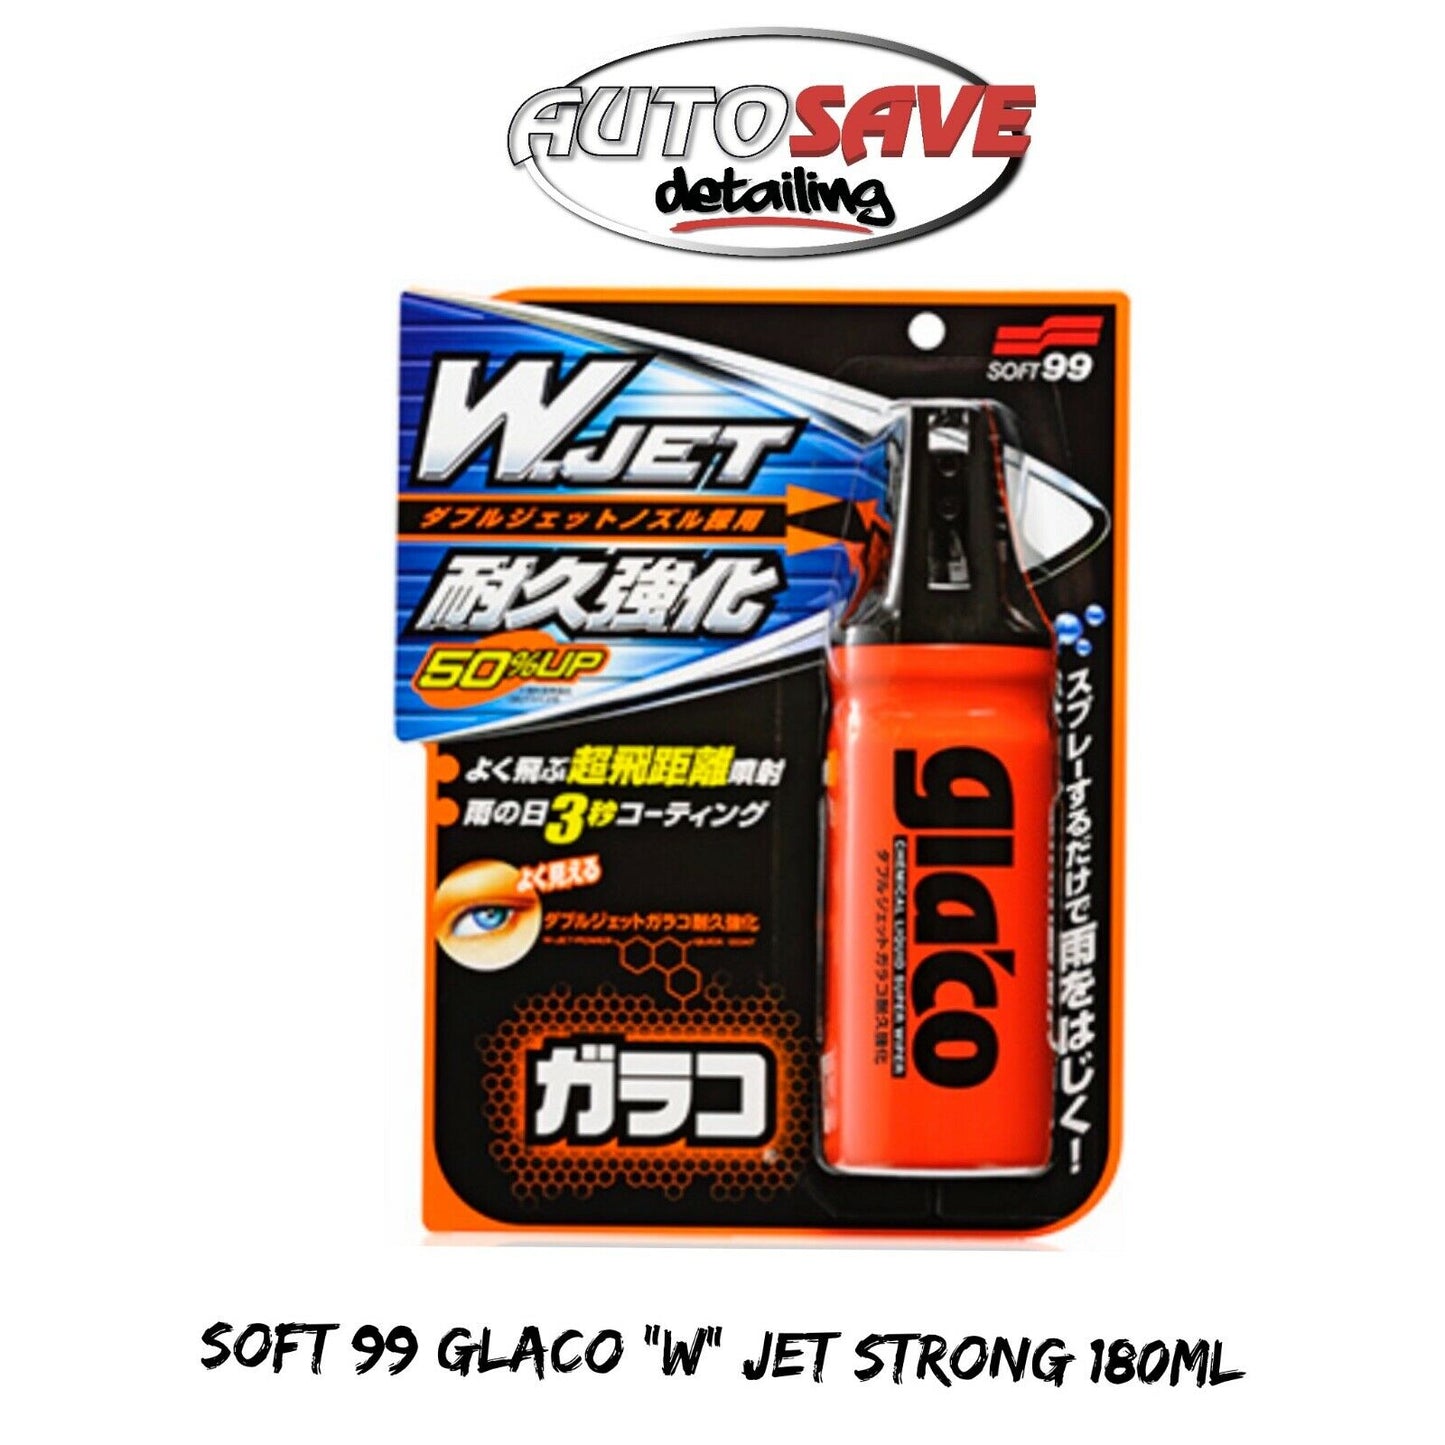 Soft99 Glaco W Jet Strong 180ml - Car Window Water Repellent Coating – 04169